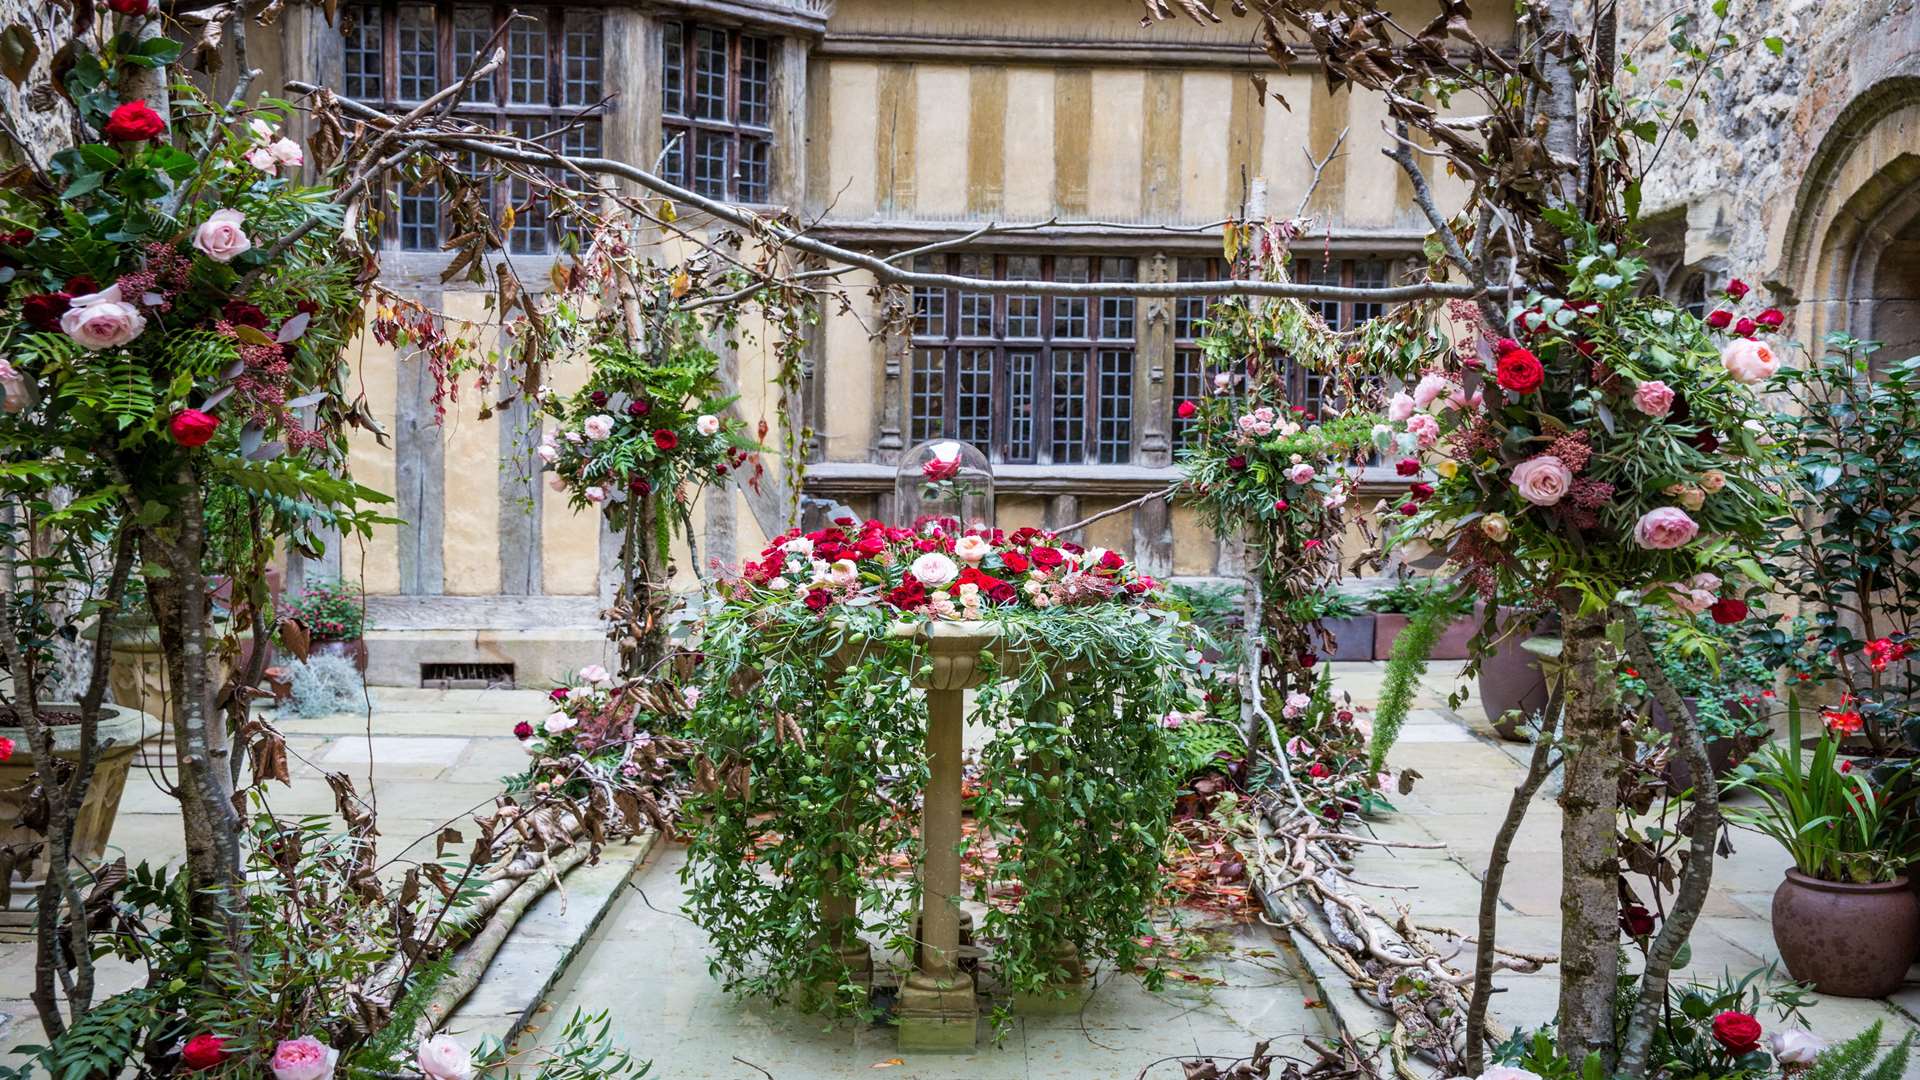 A display by Caroline Miller Floristry in the courtyard. Picture: www.matthewwalkerphotography.com